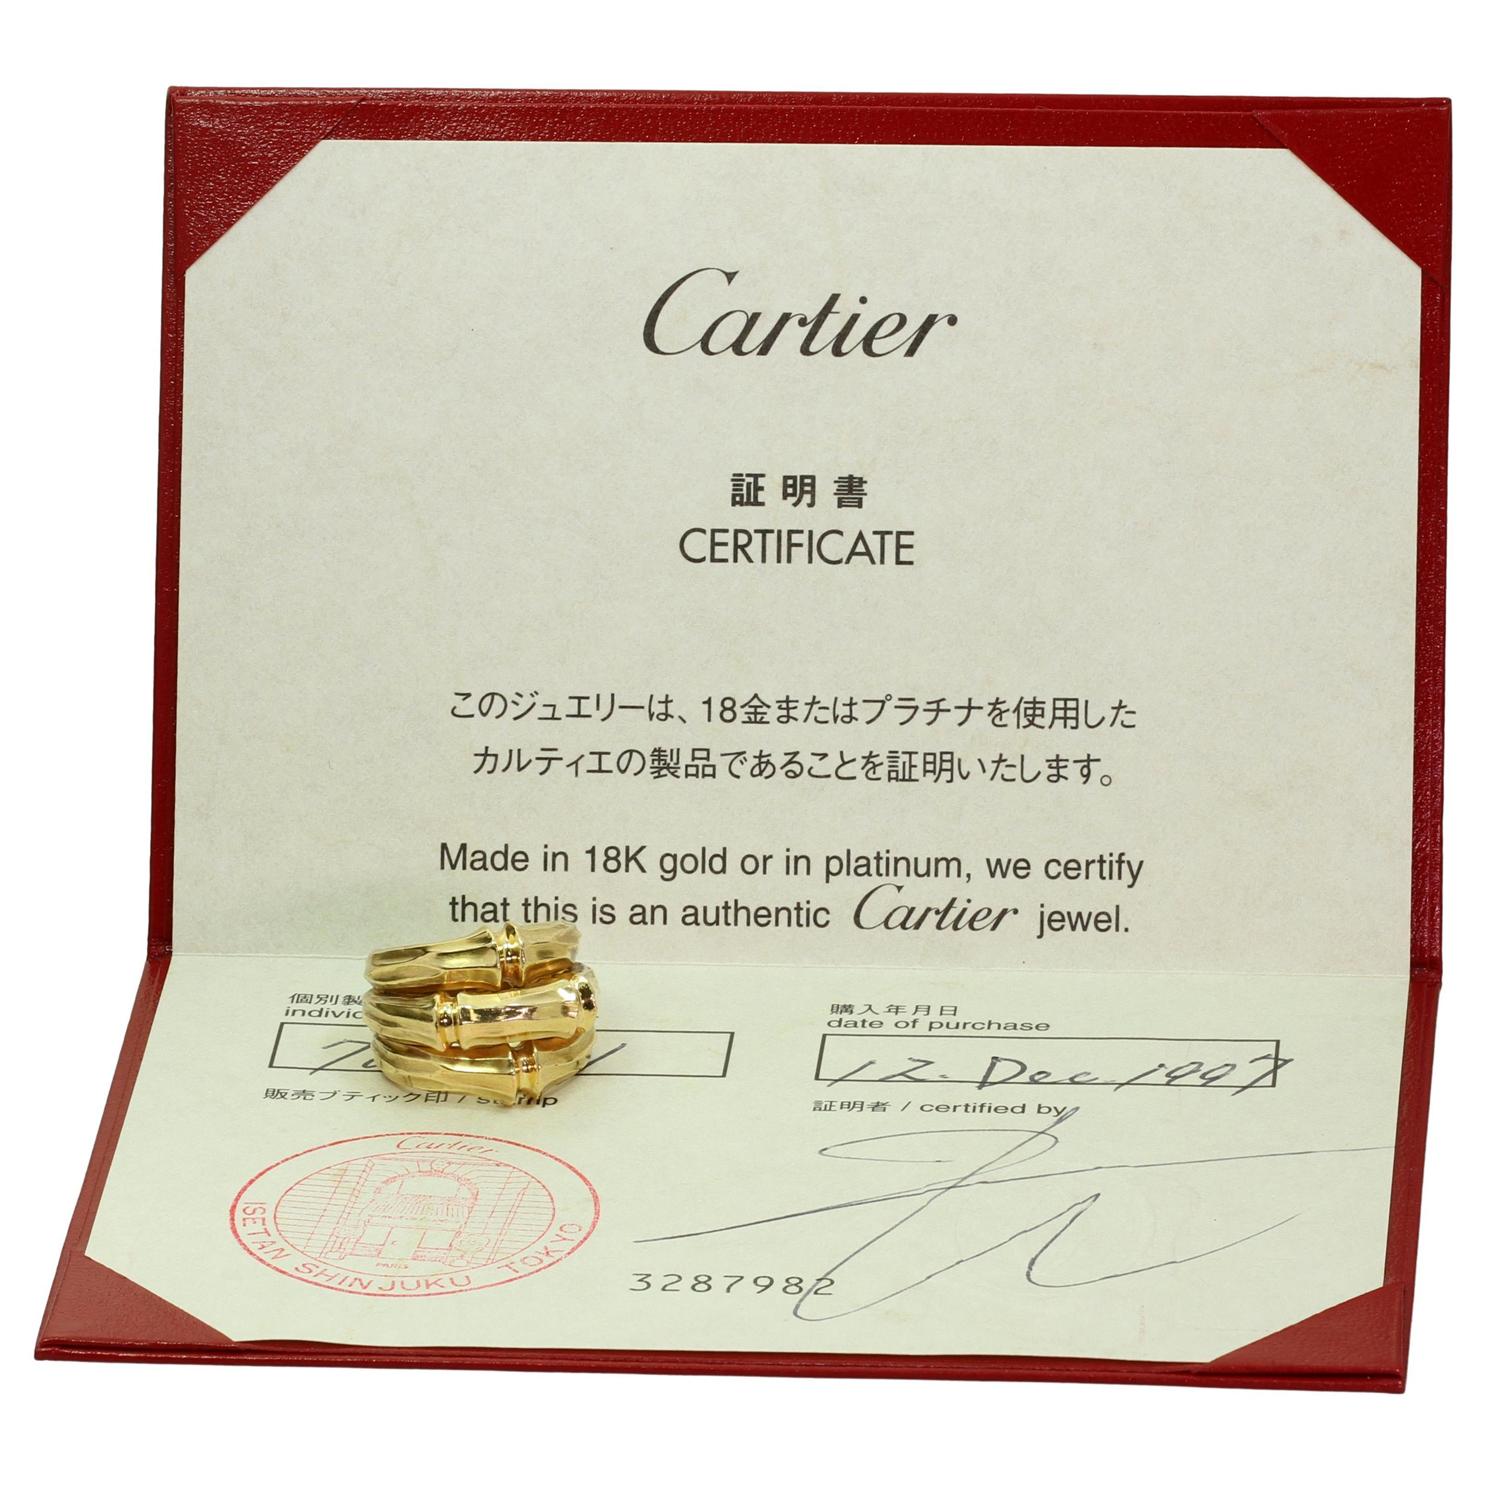 This fabulous Cartier ring from the iconic Bamboo collection is crafted in 18k yellow gold and features a three-row design inpsired by bamboo stalks. Made in France circa 1997. Measurements: 0.86